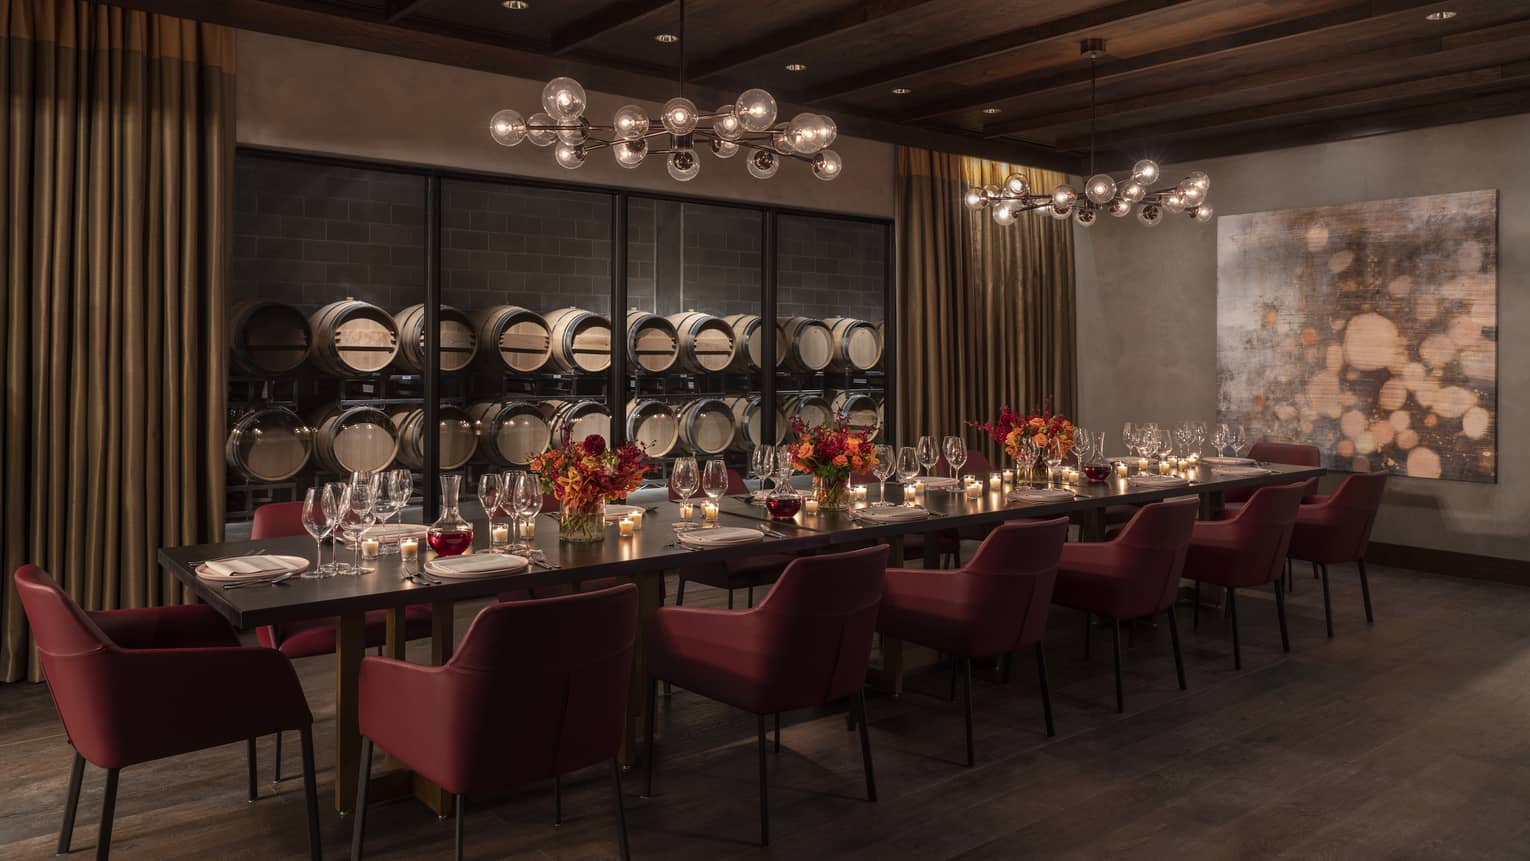 Private dining room, long table with 14 chairs, wooden ceiling, wine barrels